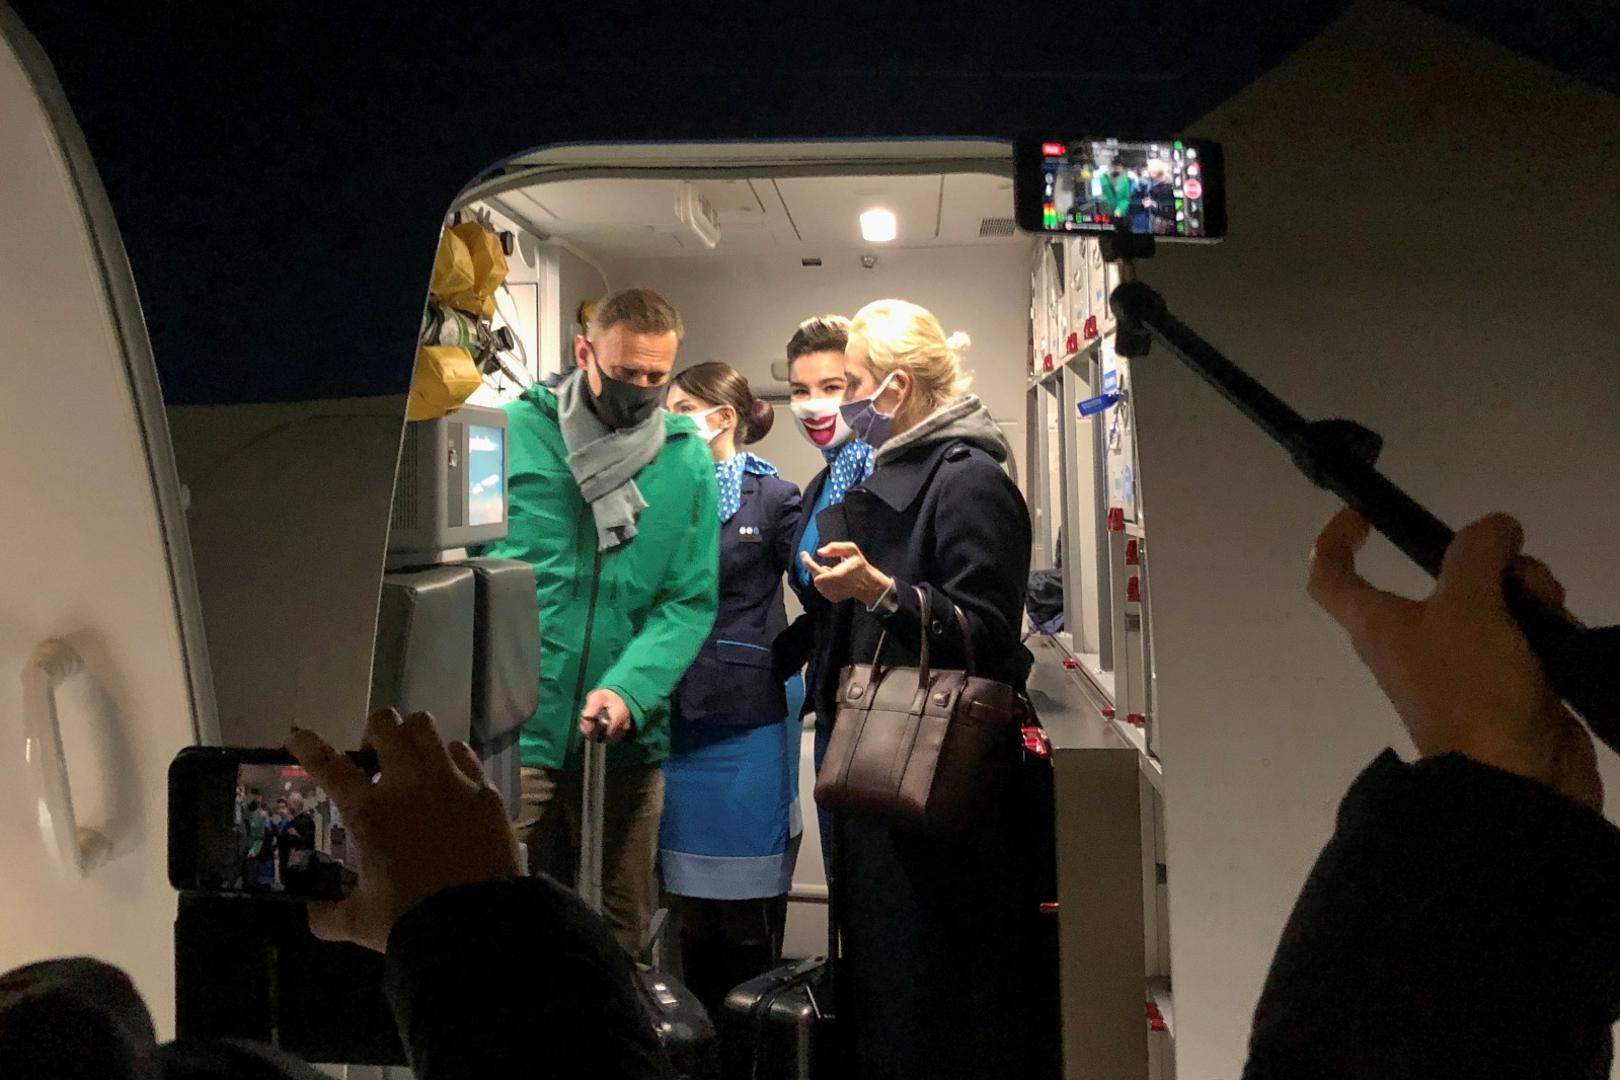 FILE PHOTO: Russian opposition leader Alexei Navalny arrives in Moscow FILE PHOTO: Russian opposition leader Alexei Navalny and his wife Yulia Navalnaya walk out of a plane after arriving at Sheremetyevo airport in Moscow, Russia January 17, 2021. REUTERS/Polina Ivanova/File Photo STAFF